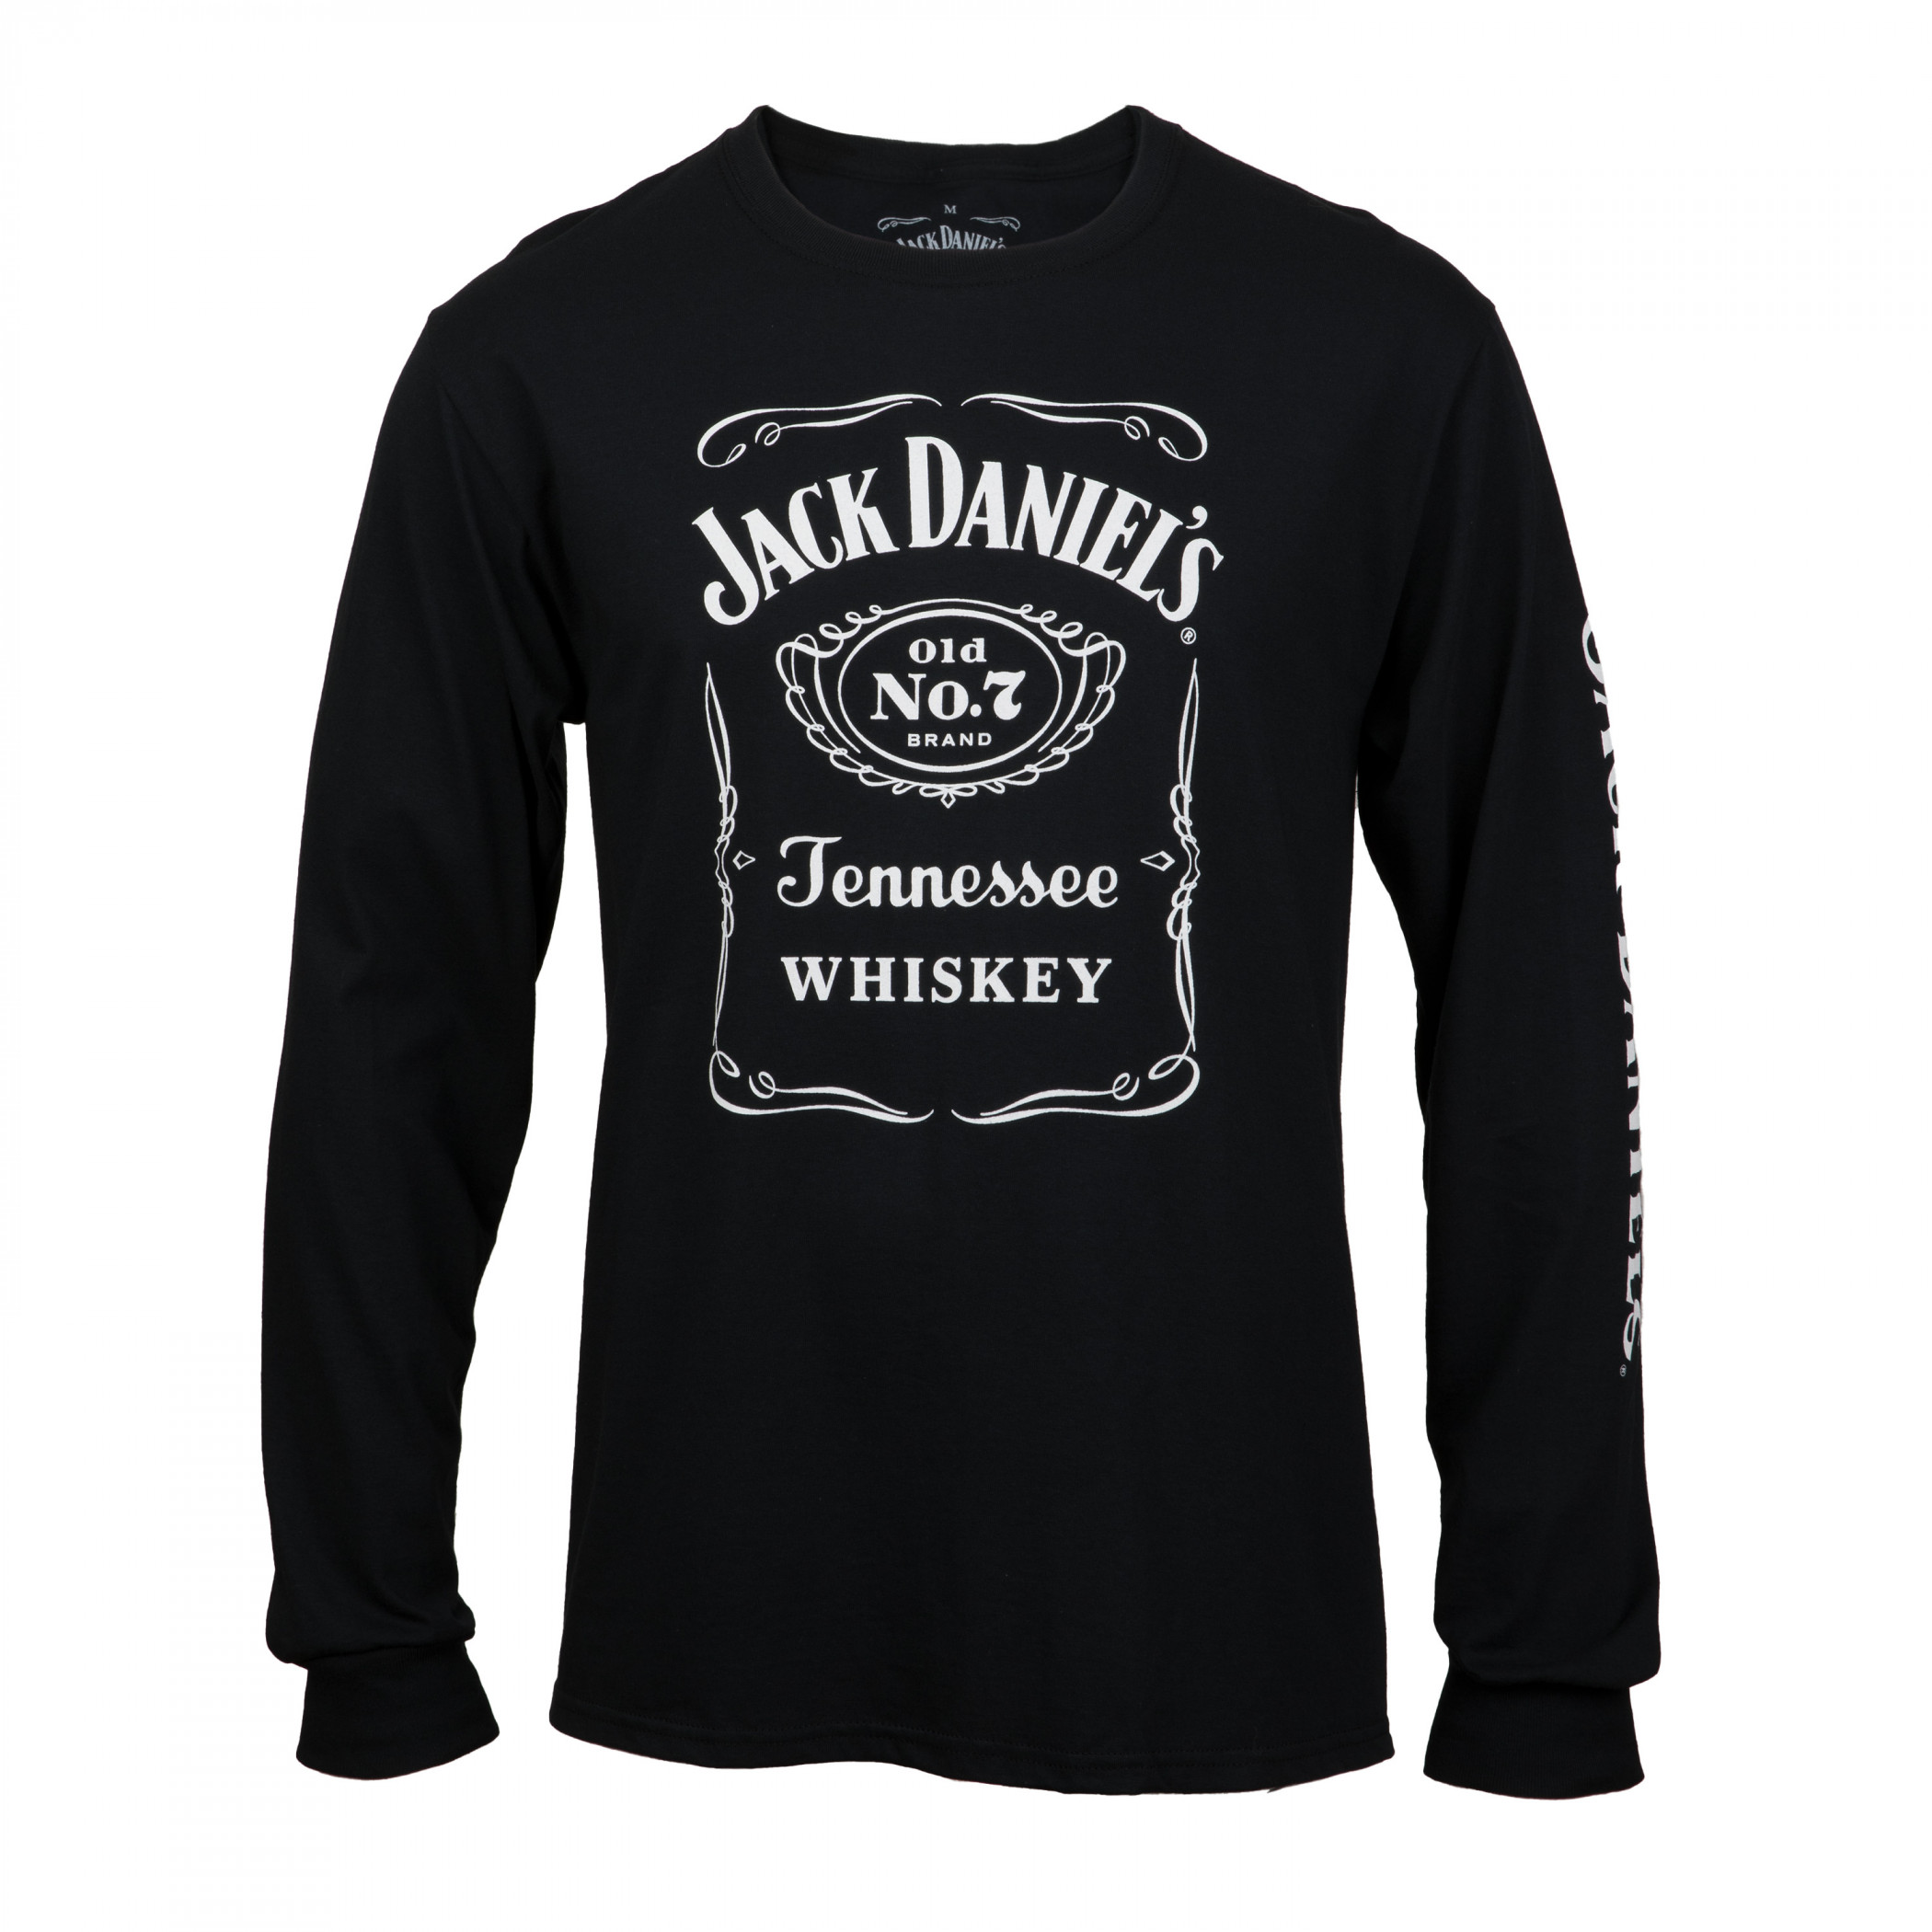 Jack Daniel's Old No.7 Brand Tennessee Whiskey Long Sleeve Shirt